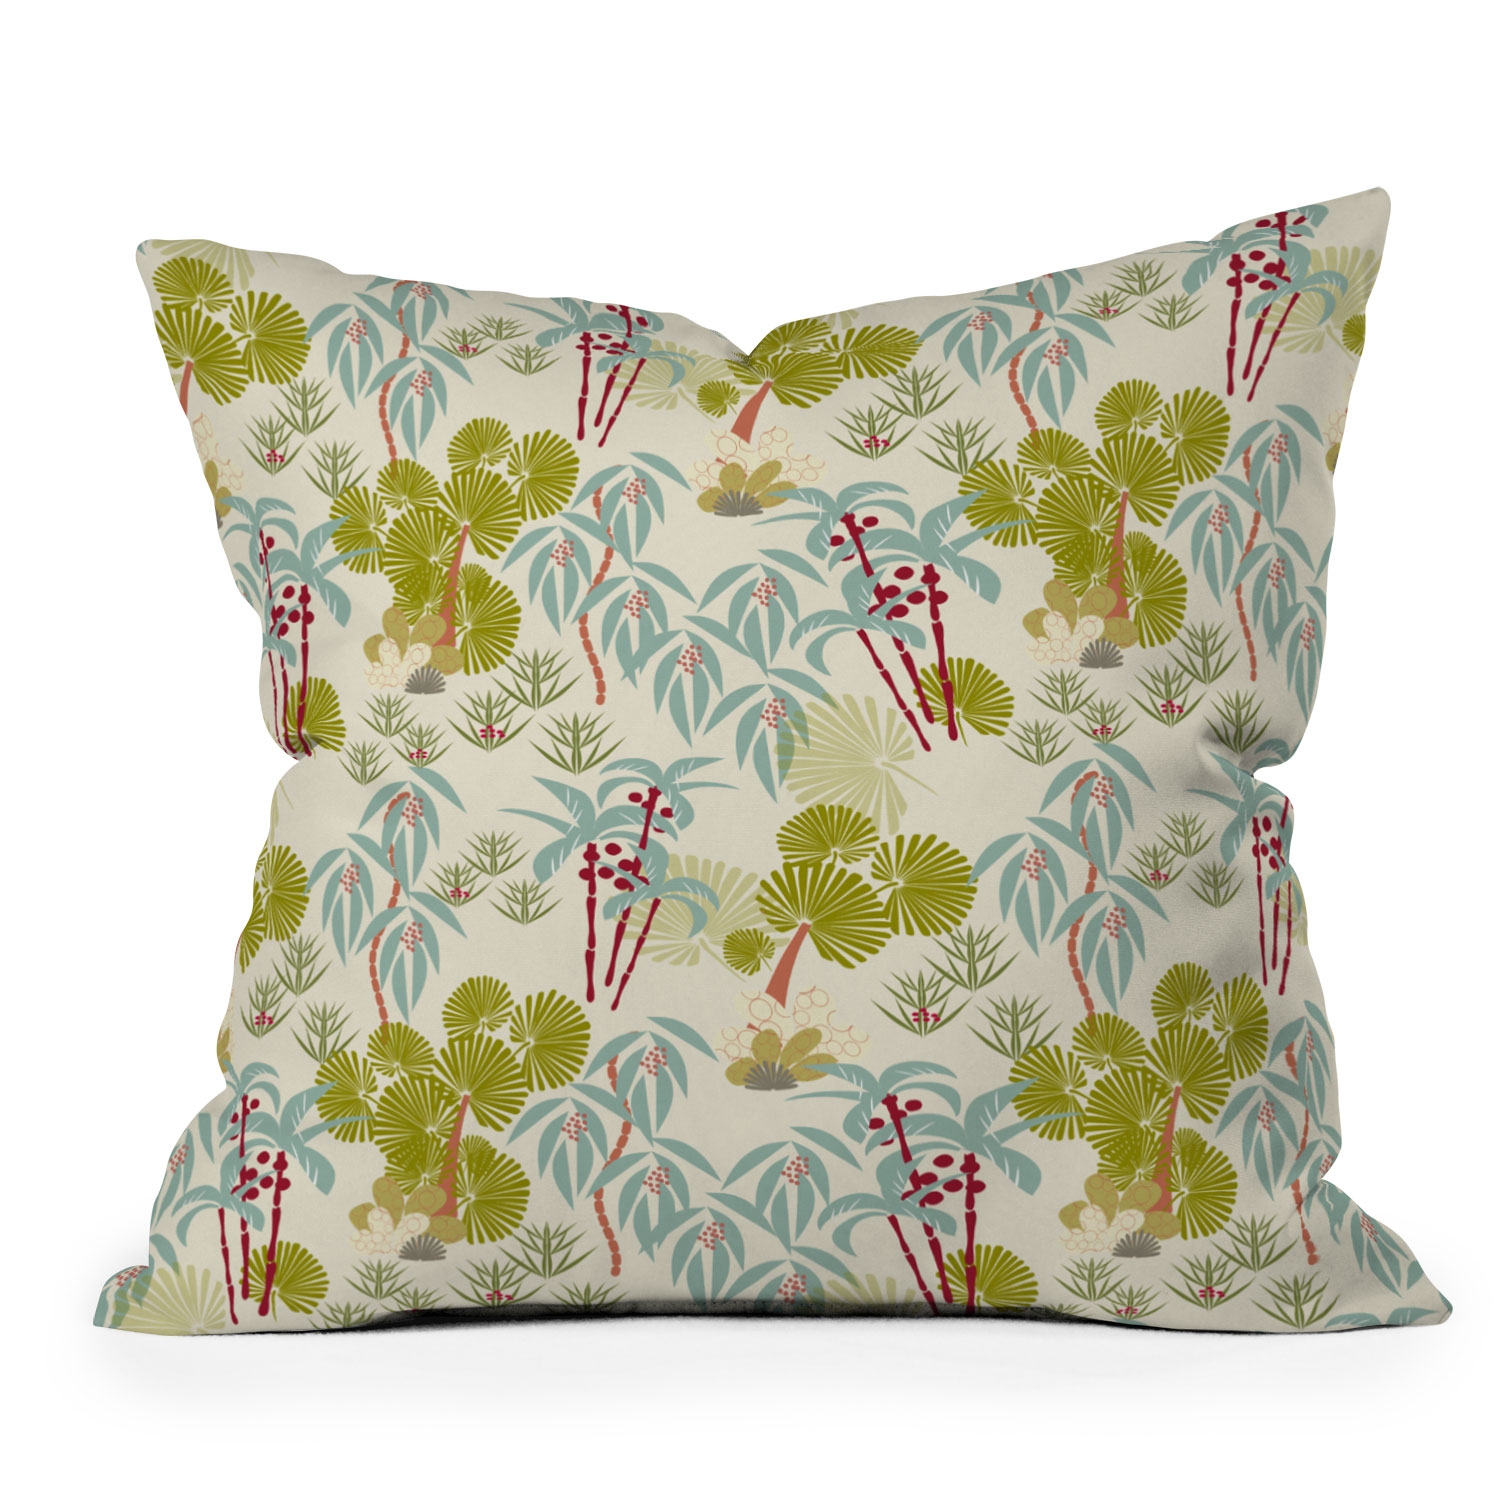 Tropical Spring by Mirimo - Indoor Throw Pillow 18" x 18" cover only - Image 0